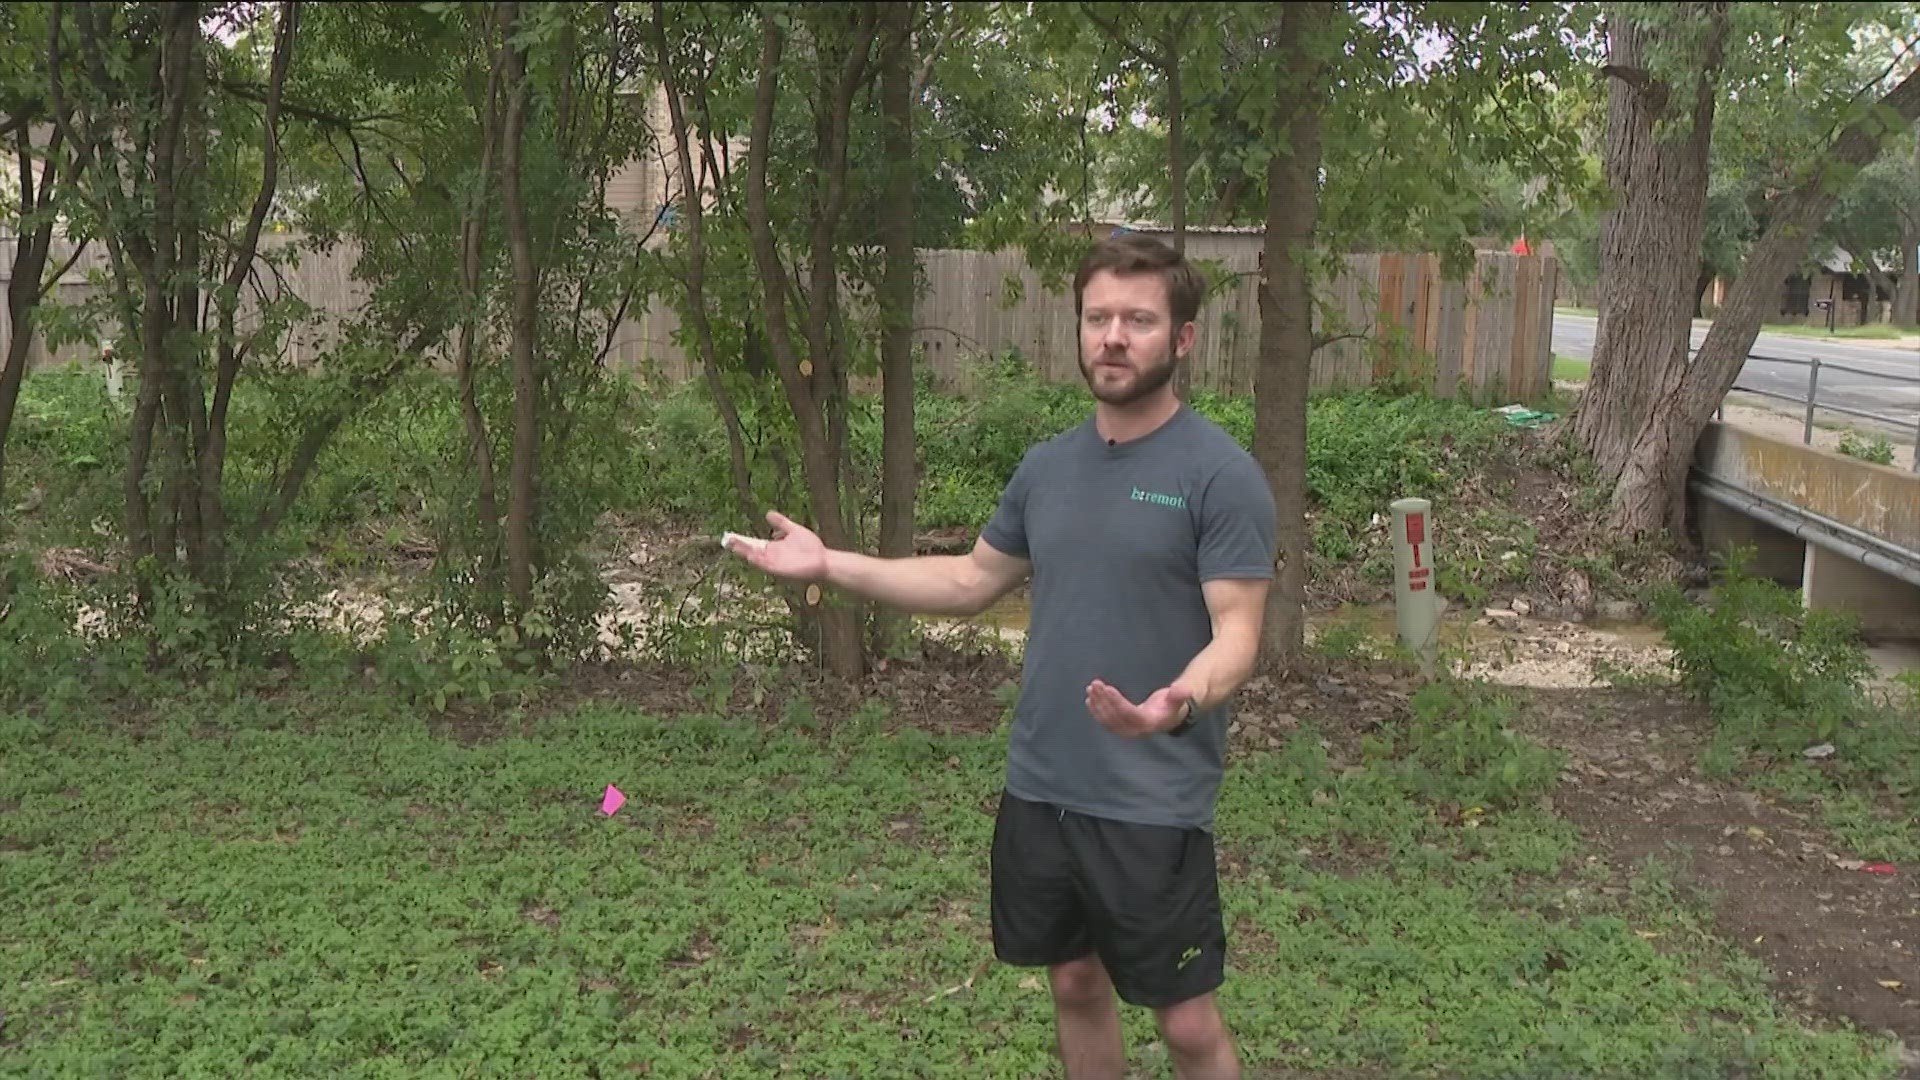 It's been six months since floods damaged homes along Little Walnut Creek in North Austin. Neighbors are worried about what more rainfall could mean.